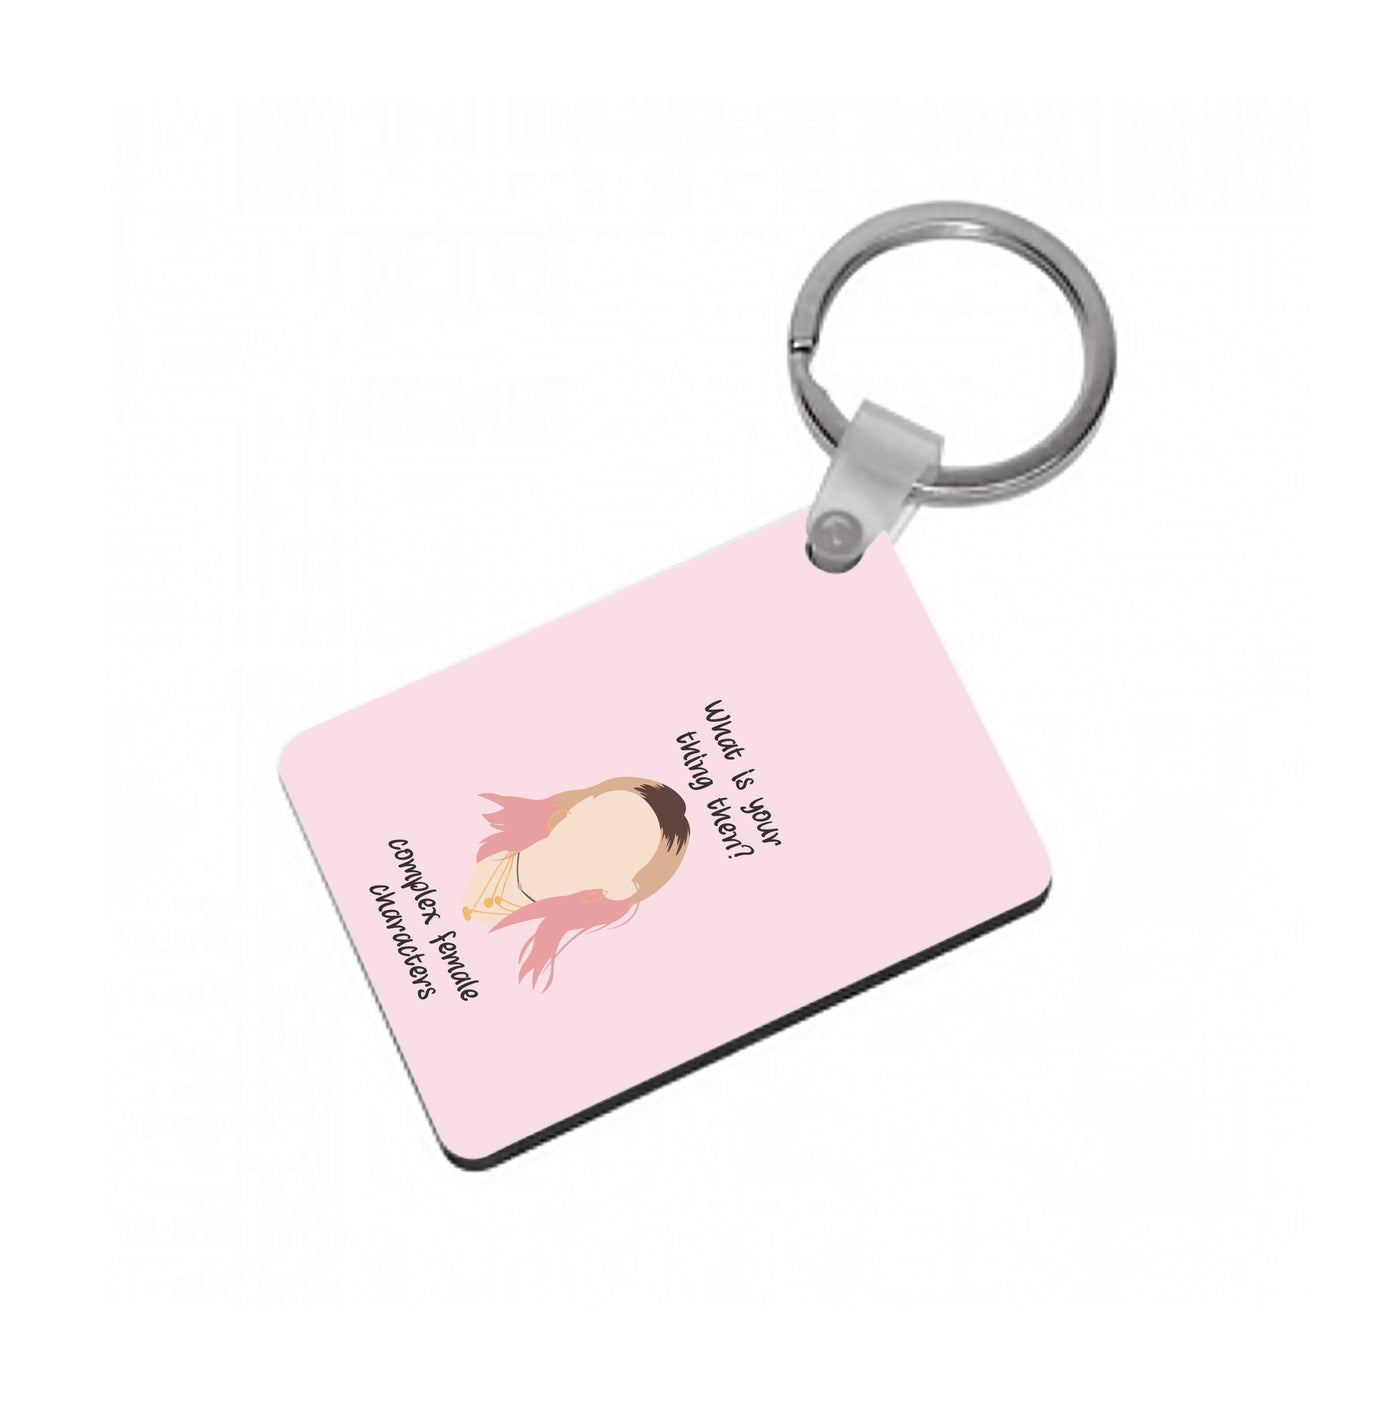 Complex Female Characters - Sex Education Keyring